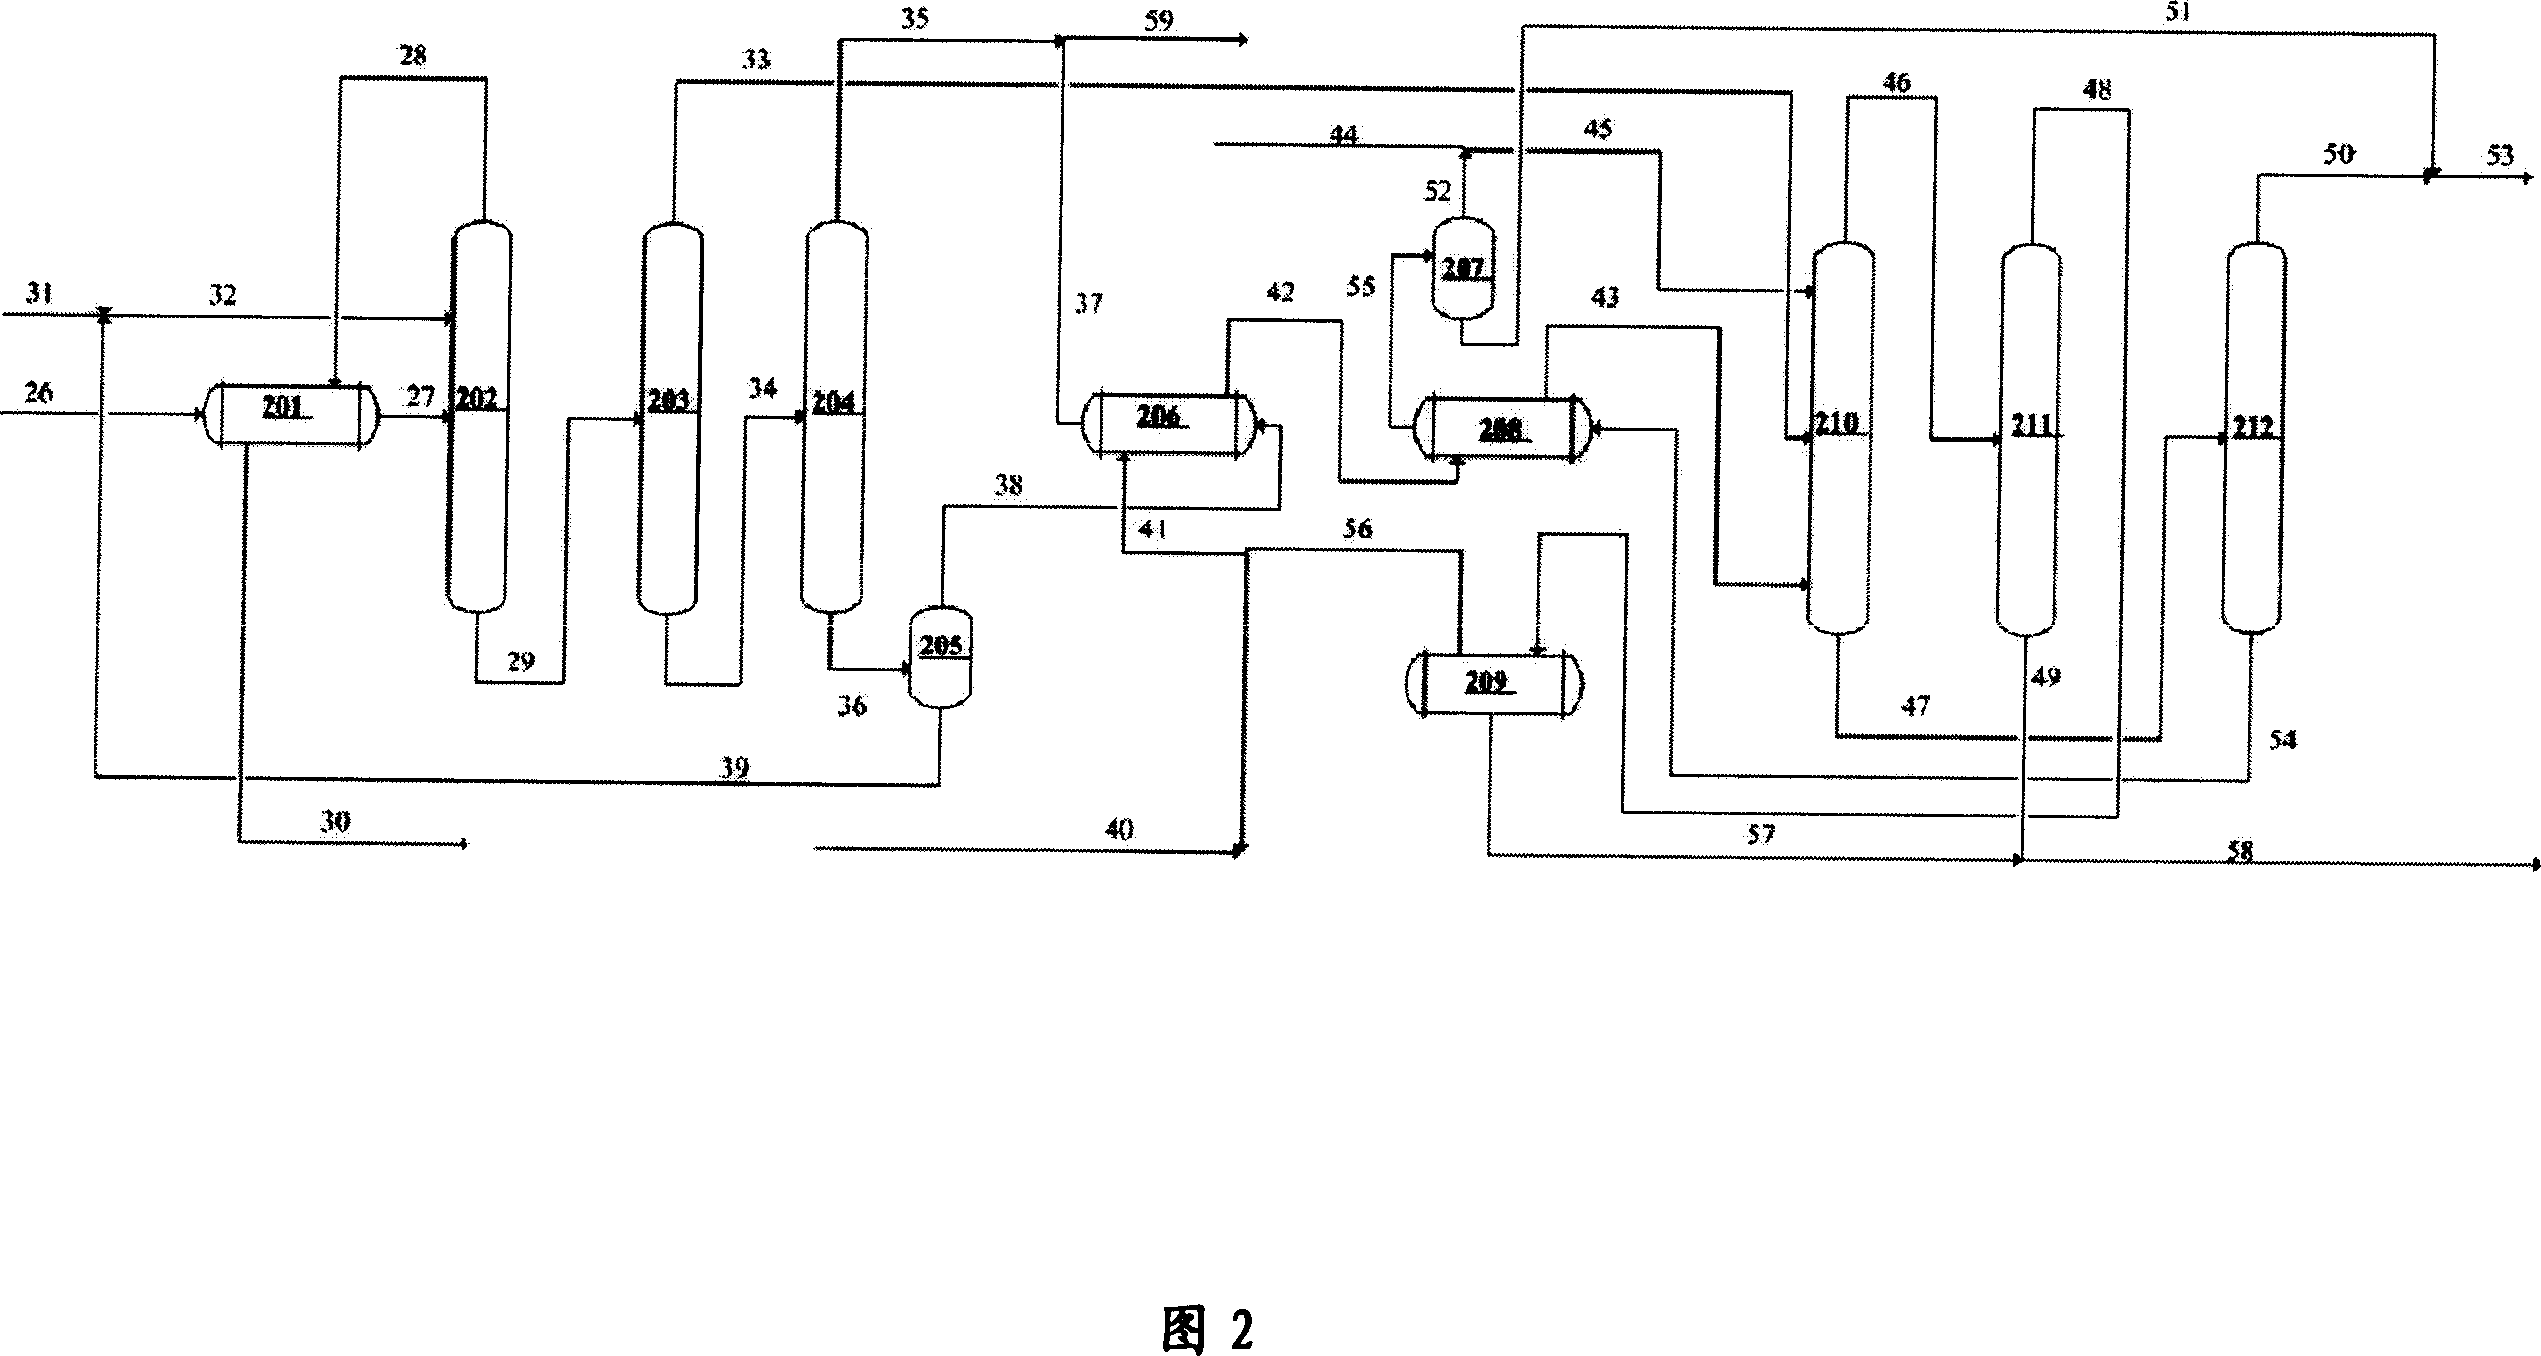 Method of double solvents, benzene substitutive rectification for separating c9 aromatics